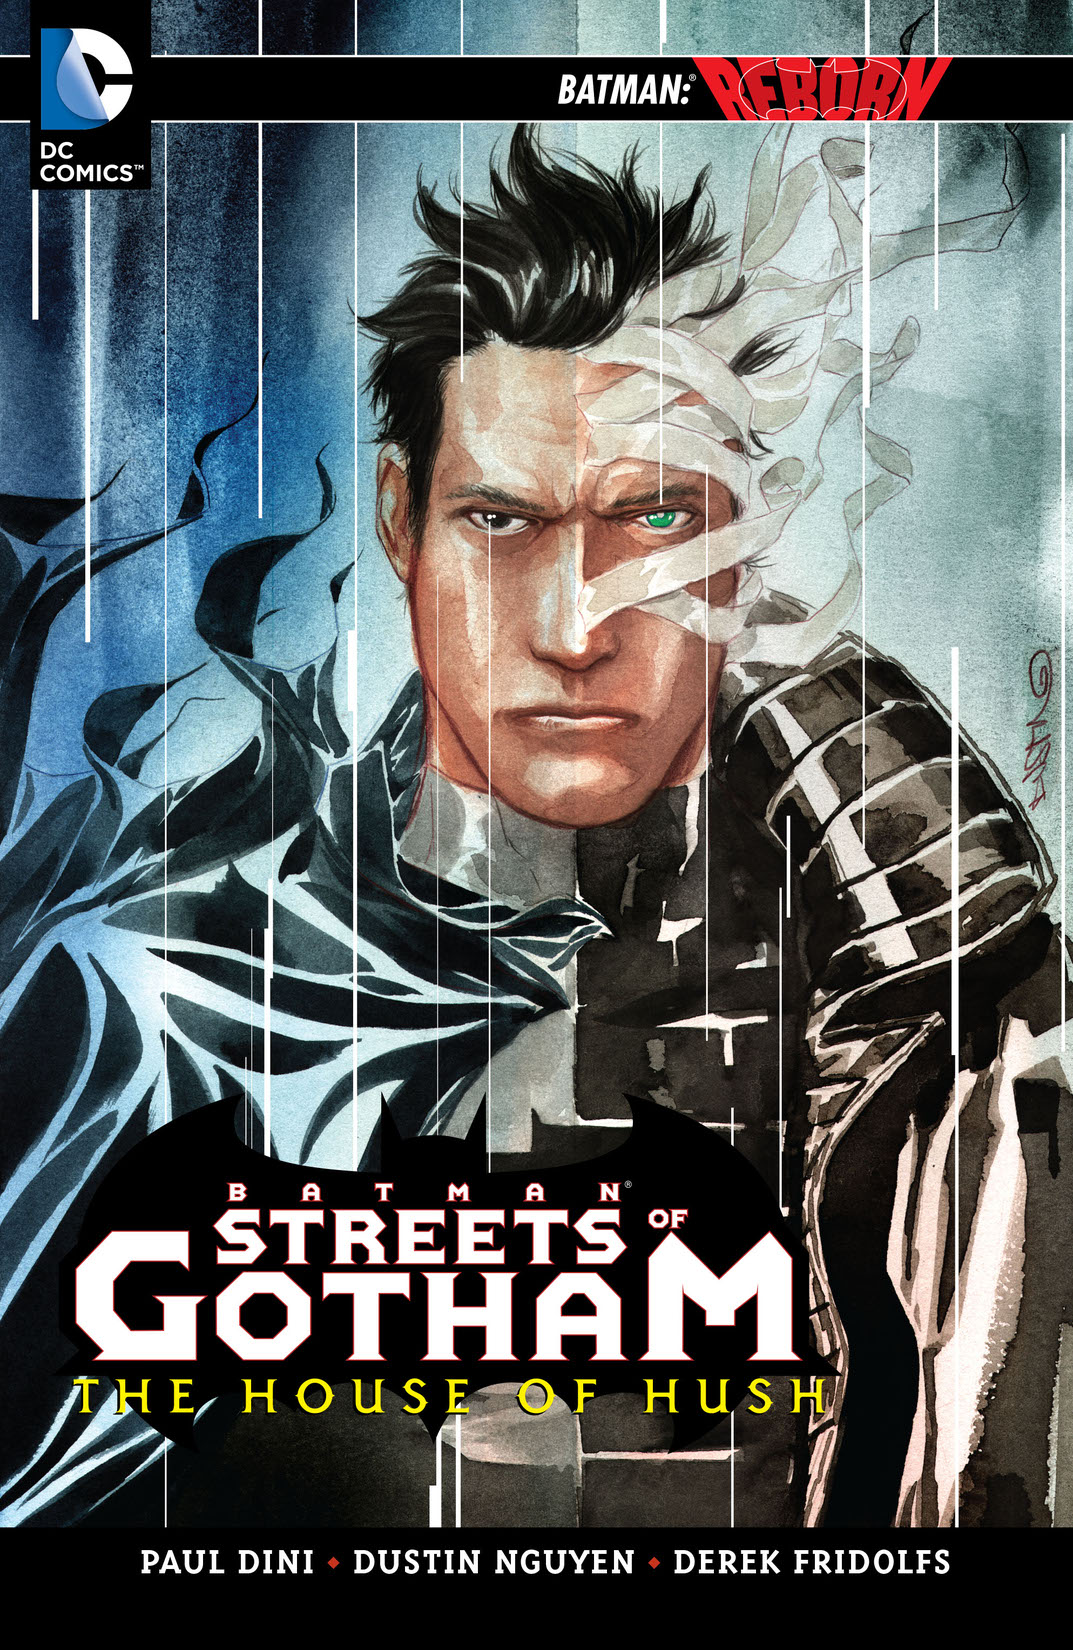 Batman: Streets of Gotham - The House of Hush preview images